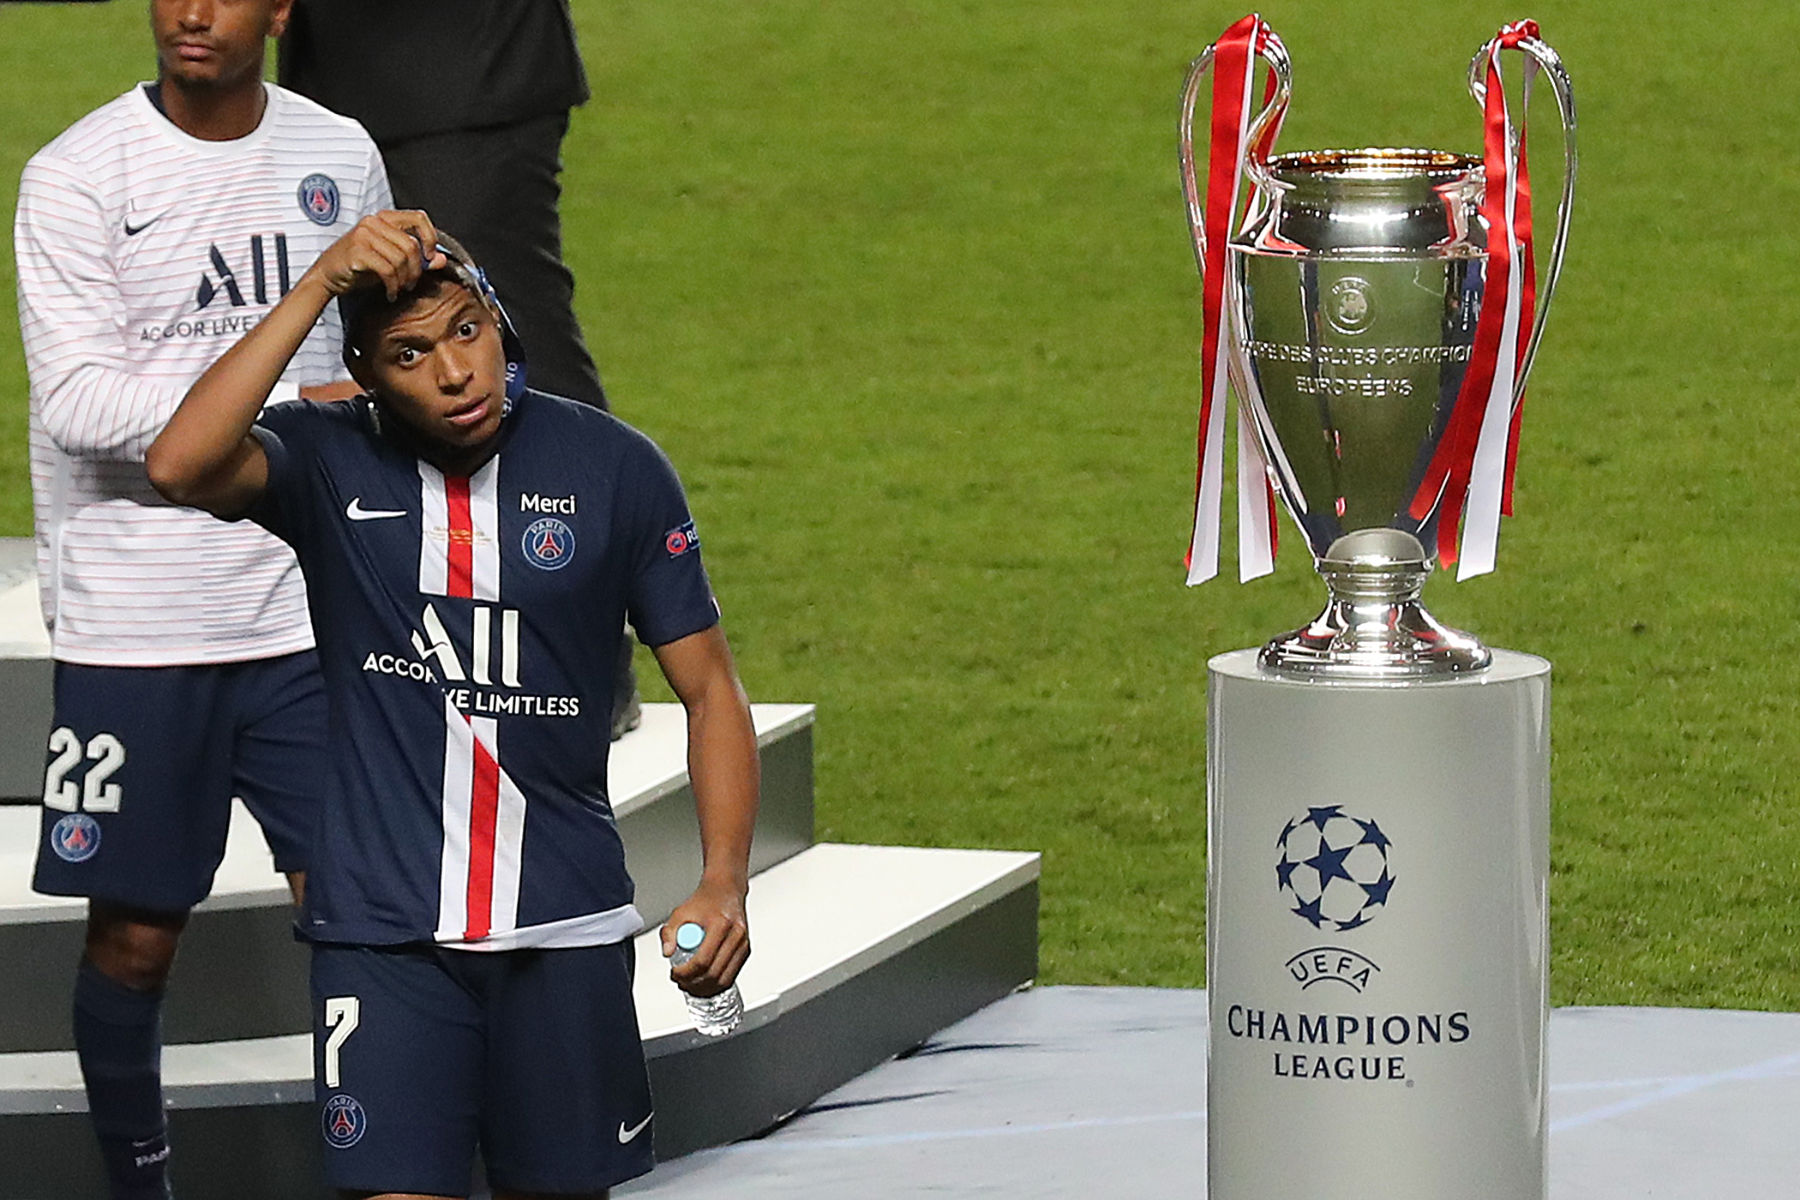 Kylian Mbappé Provides an Update on His Injured Ankle and Reflects on the Champions League Final Loss - PSG Talk